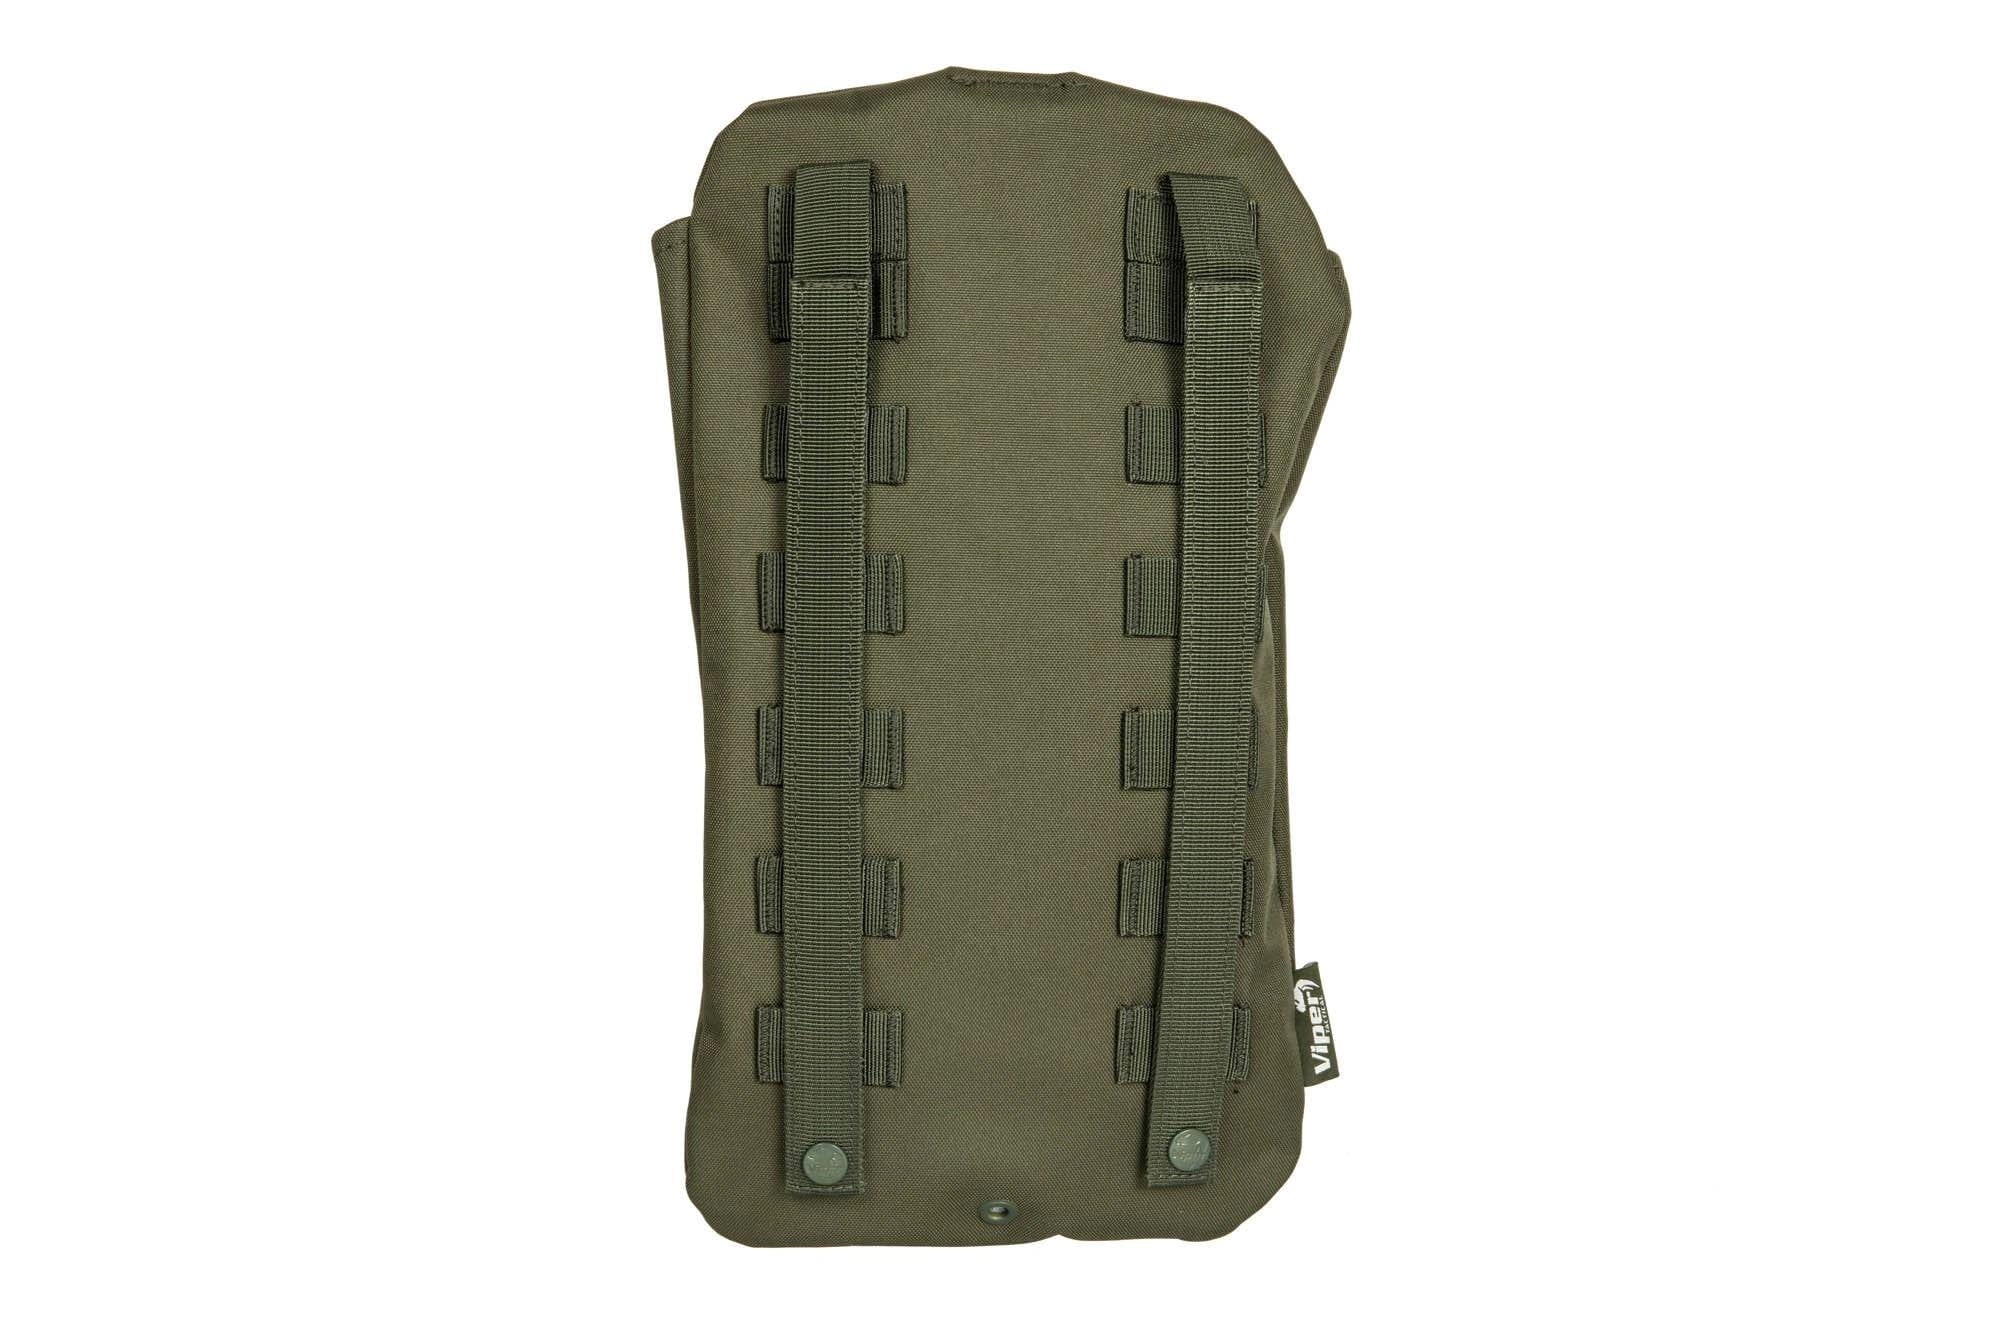 Sac d'hydratation modulaire - Olive Drab